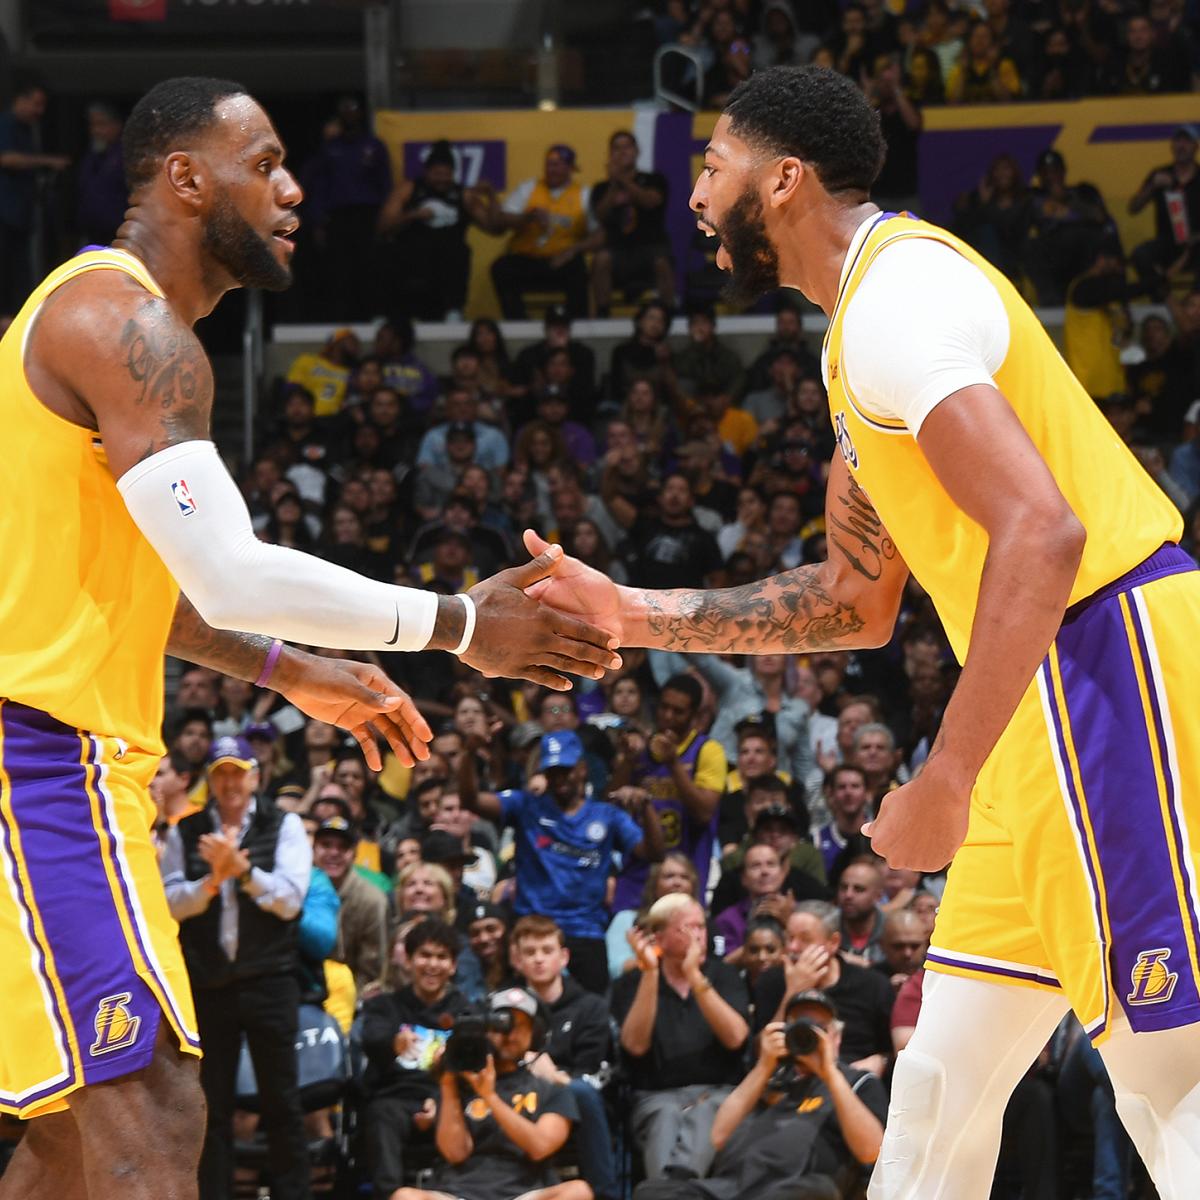 Lebron James Has Passed The Los Angeles Lakers Torch To Anthony Davis Bleacher Report Latest News Videos And Highlights